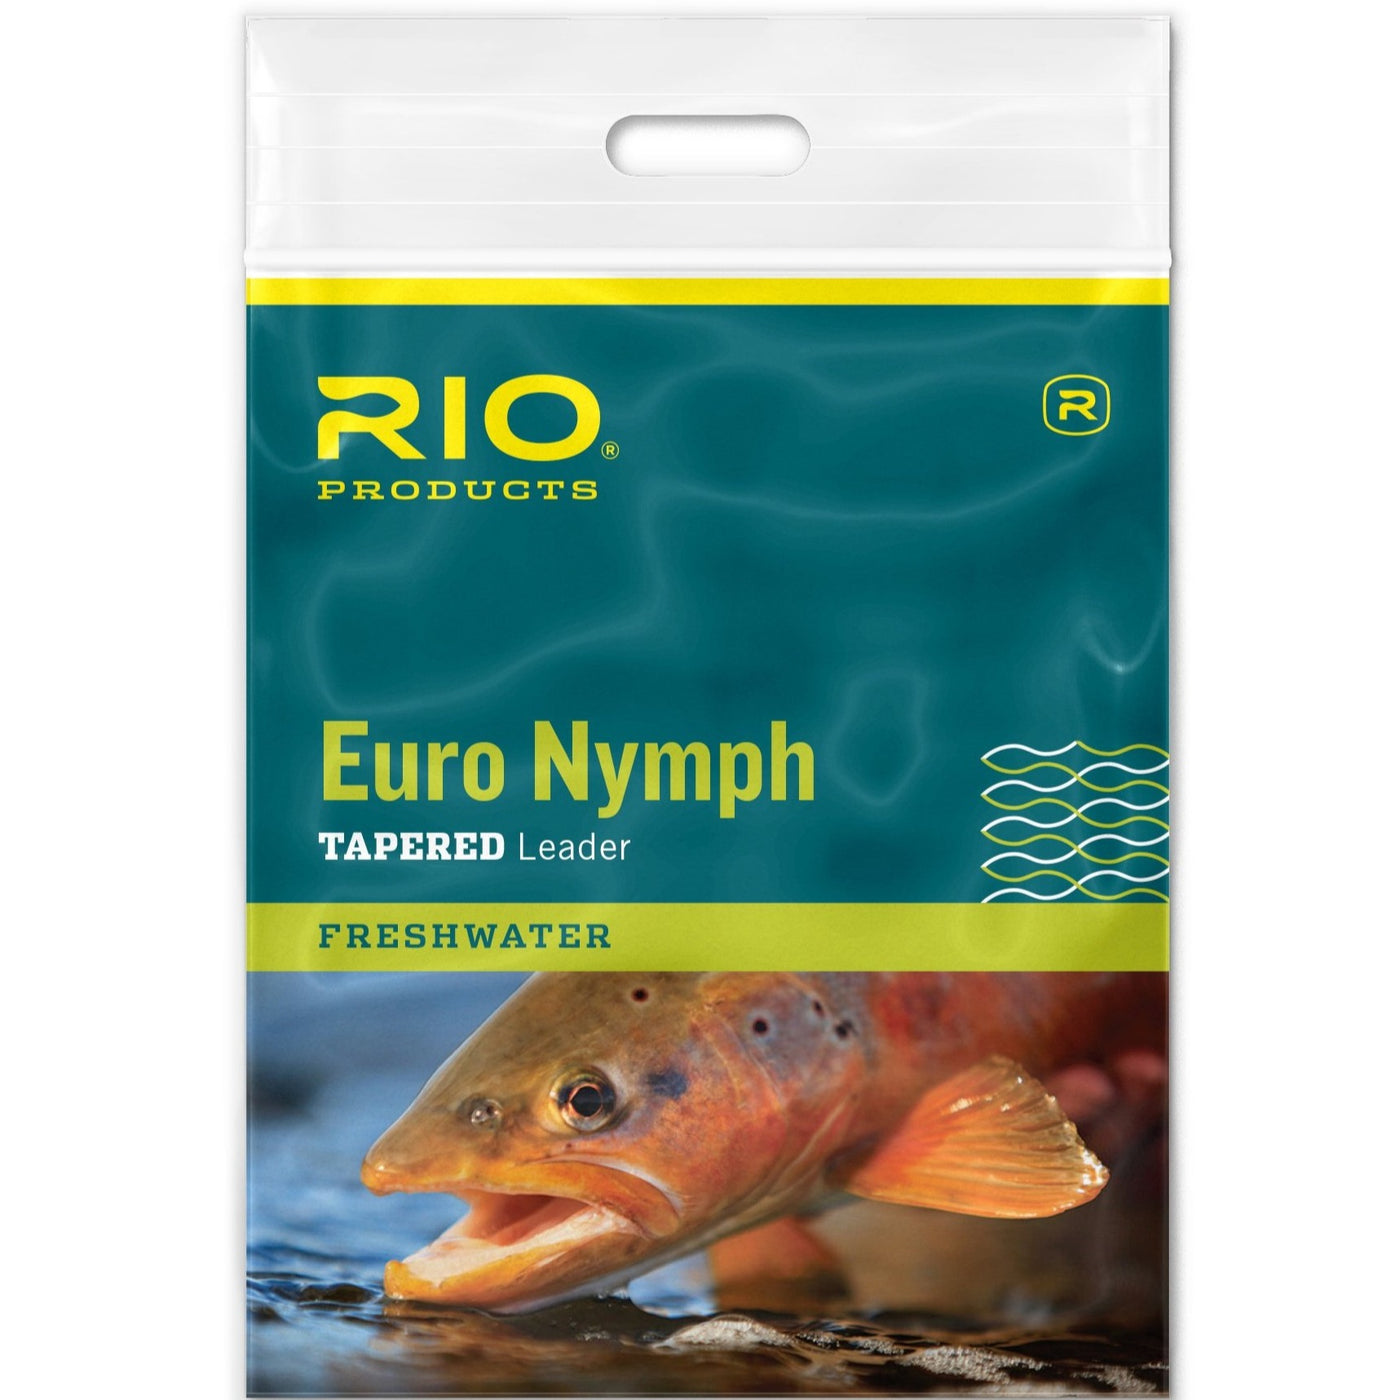 Absolute Euro Nymph Leader (1-Pack)